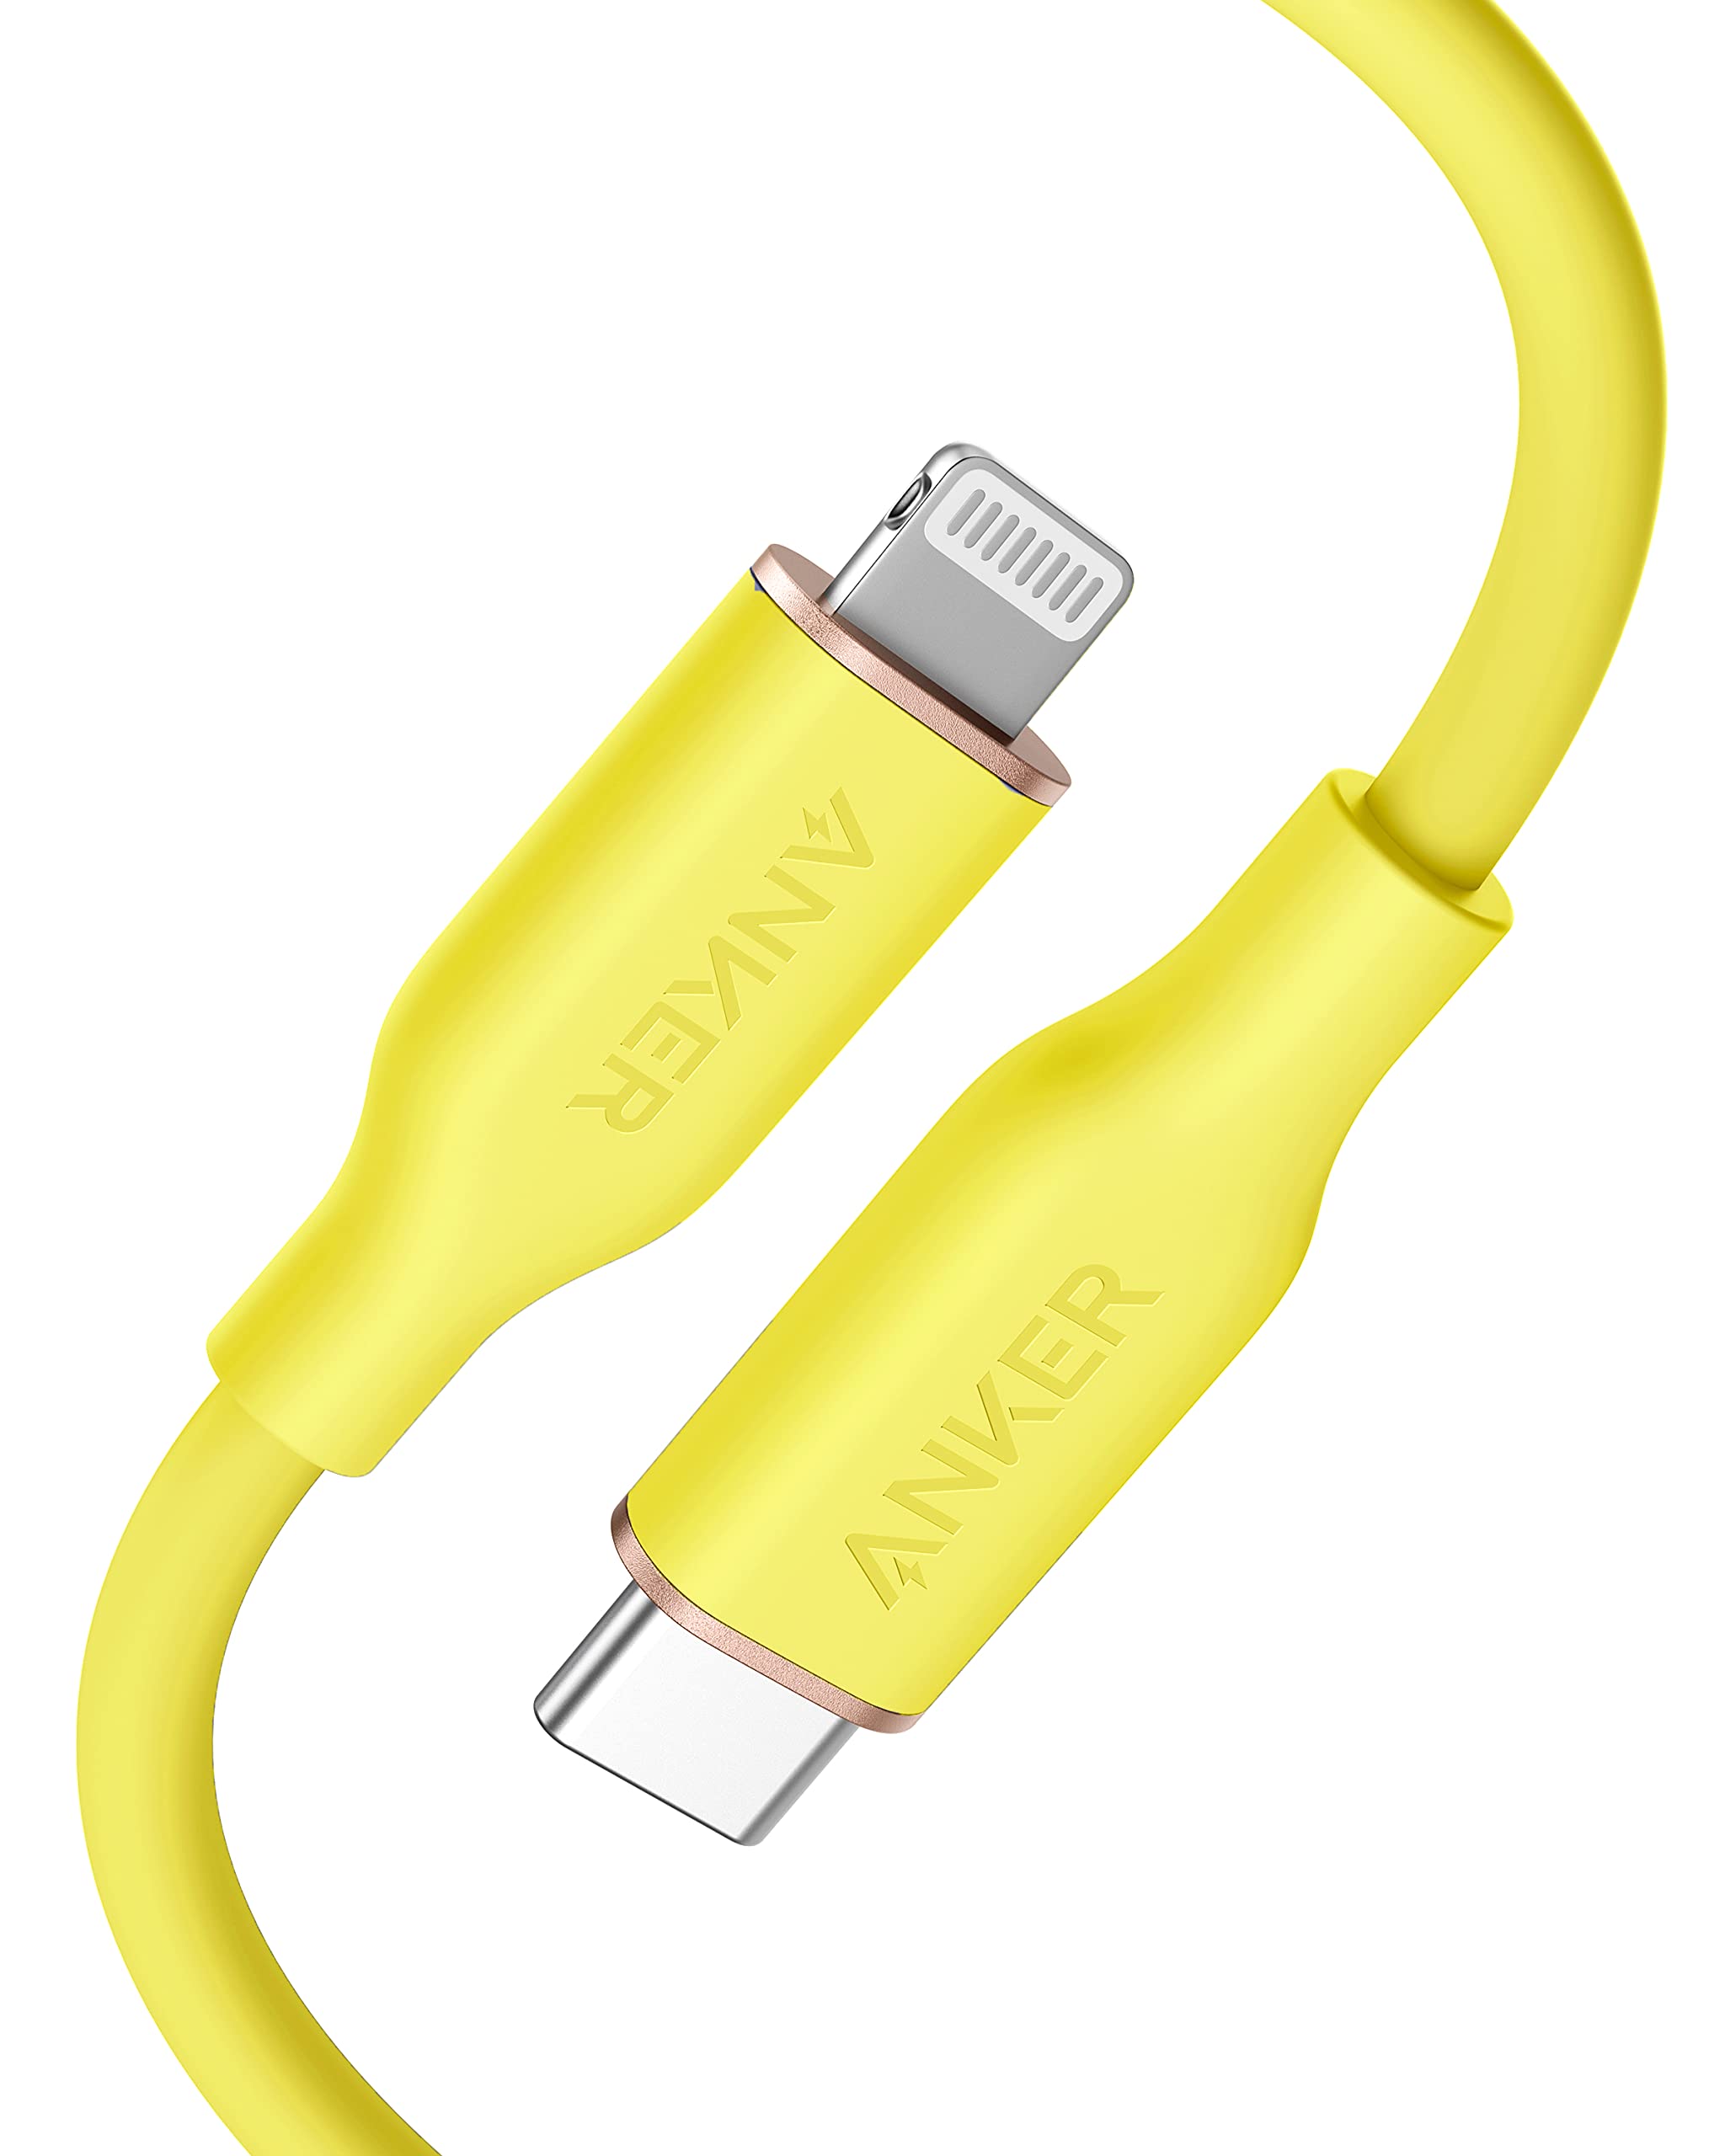 Anker 641 USB-C to Lightning Cable (Flow, Silicone) 3ft / Daffodil Yellow